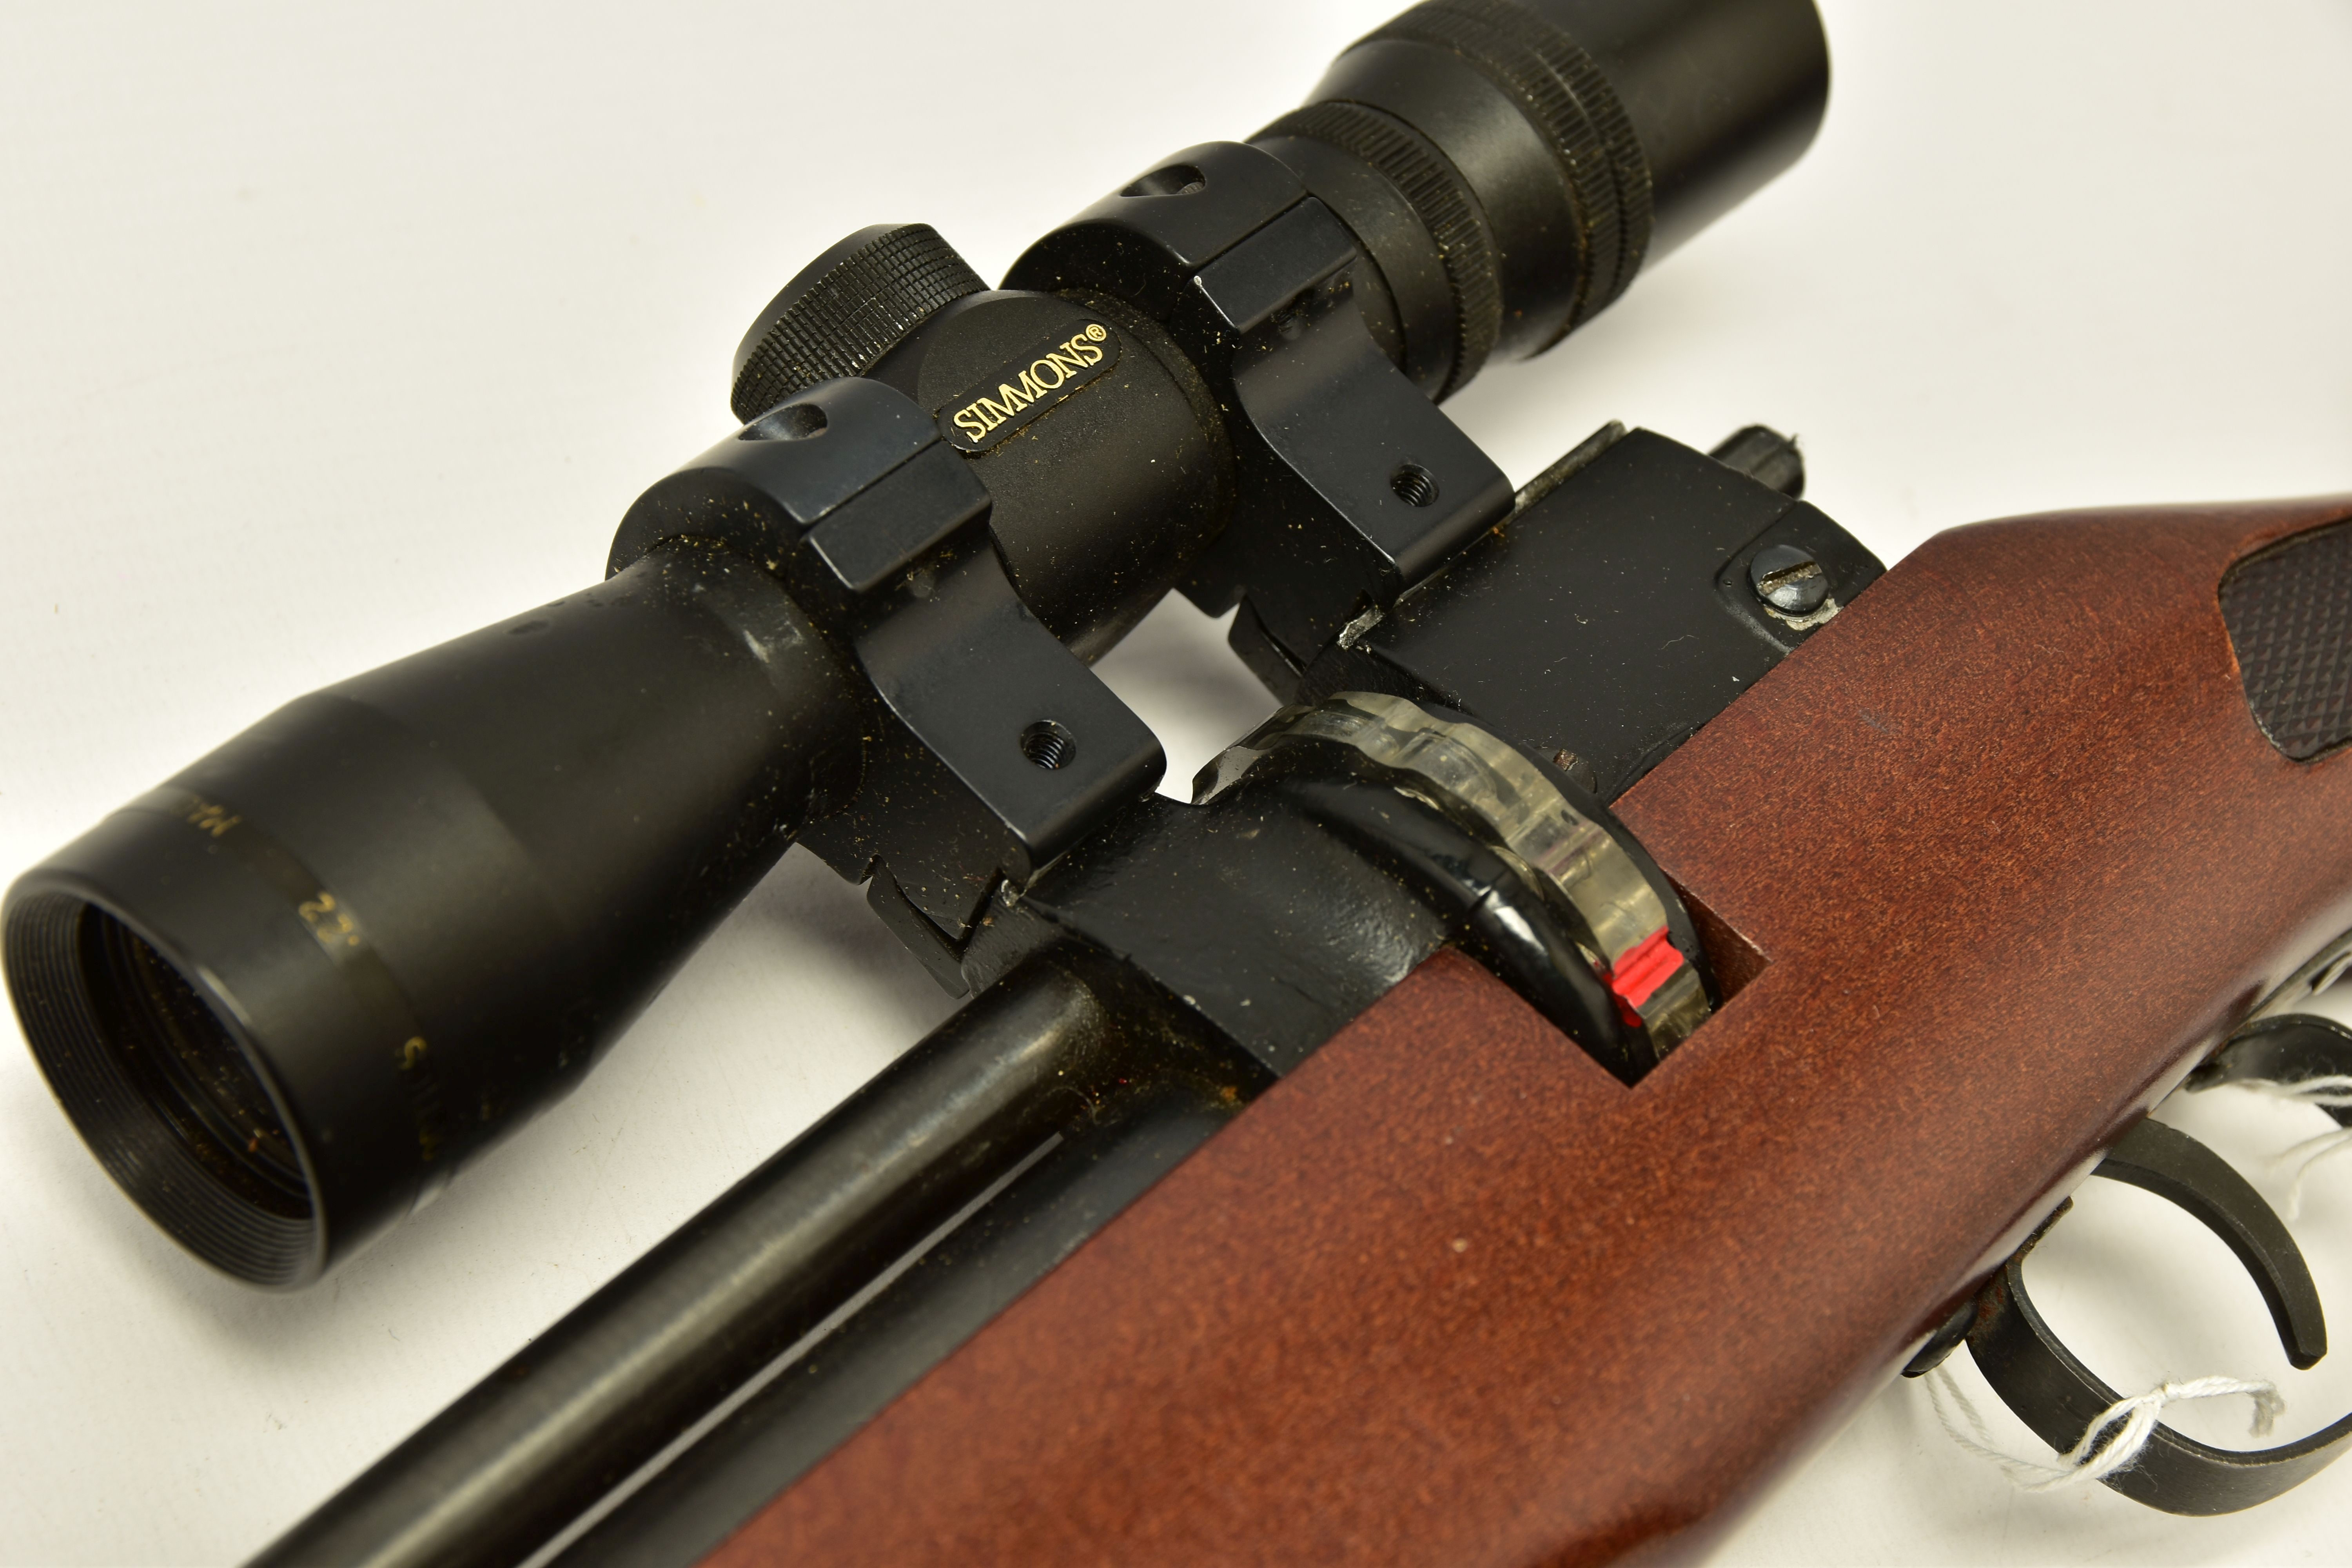 A .22 '' ROTARY MAGAZINE PUMP UP AIR RIFLE fitted with a beech stock, in working order and excellent - Image 7 of 9